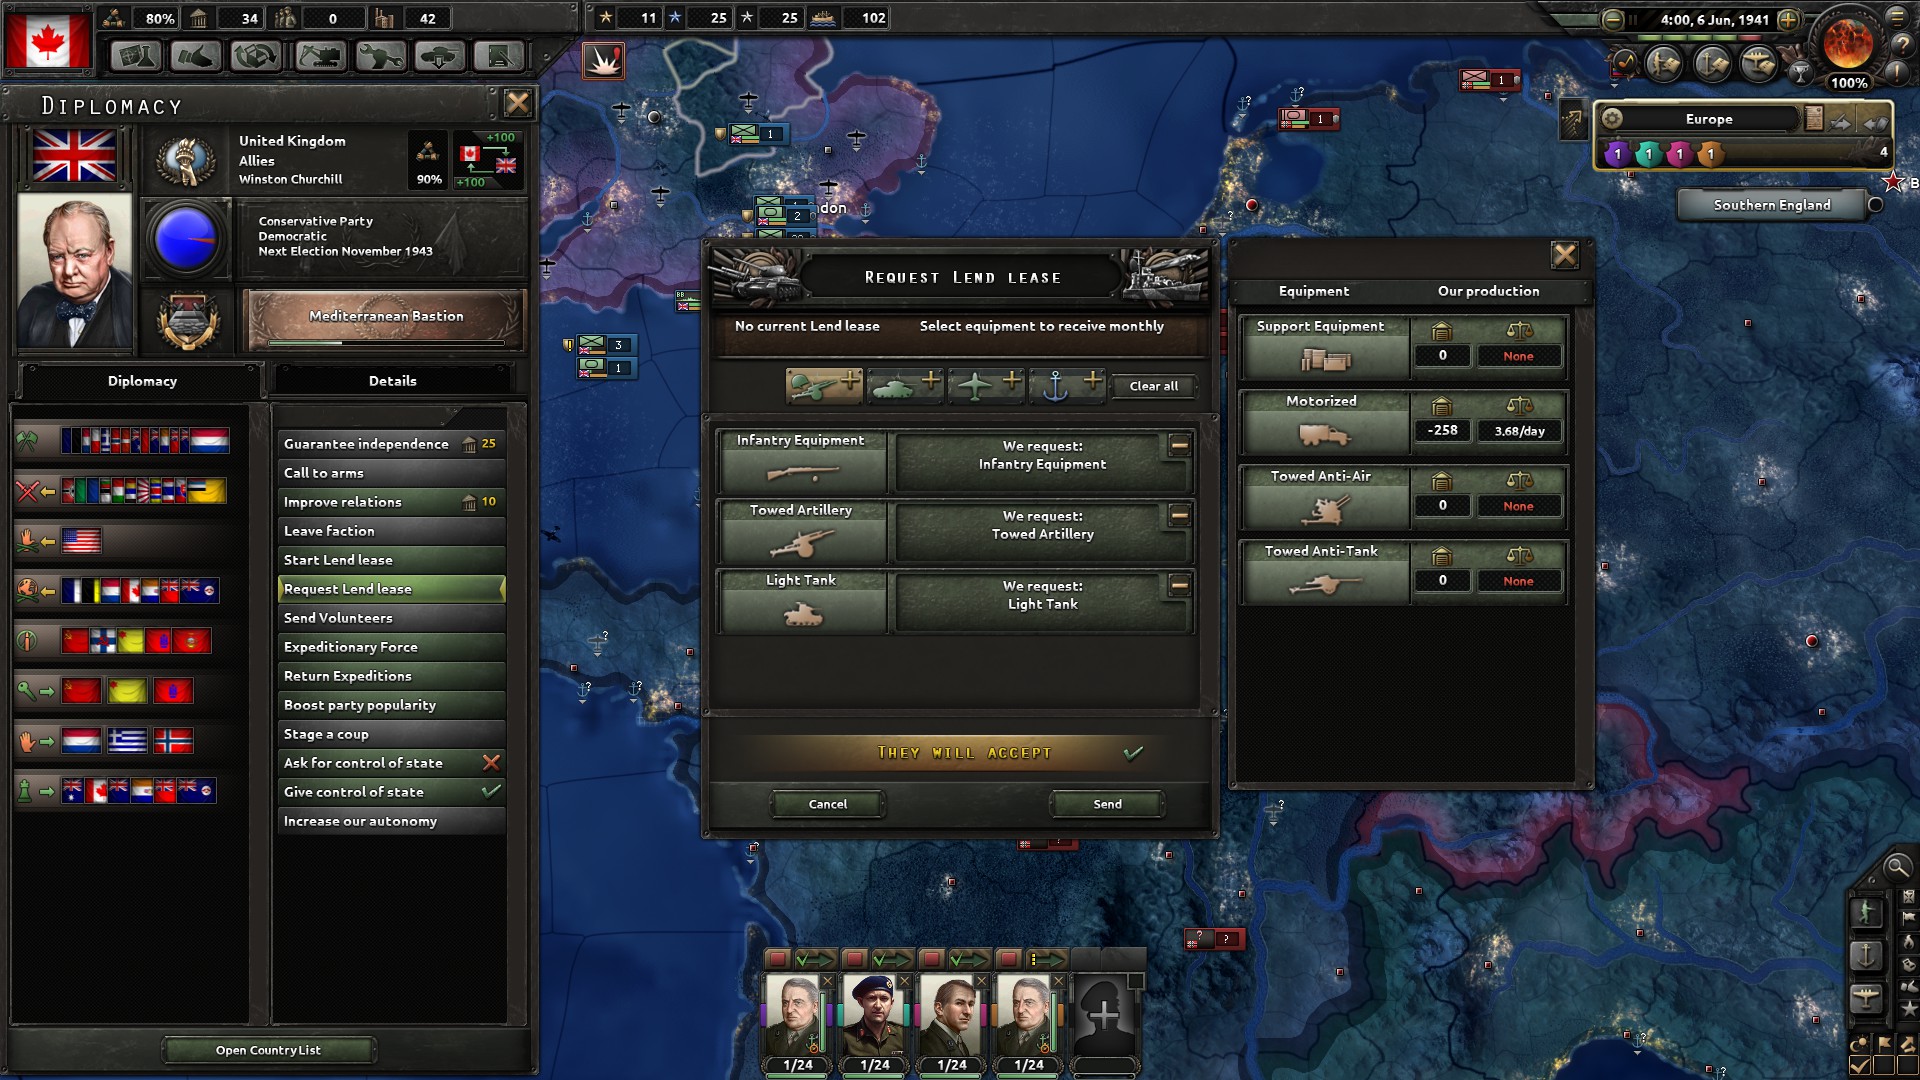 Hearts of Iron IV: Together for Victory - screenshot 2